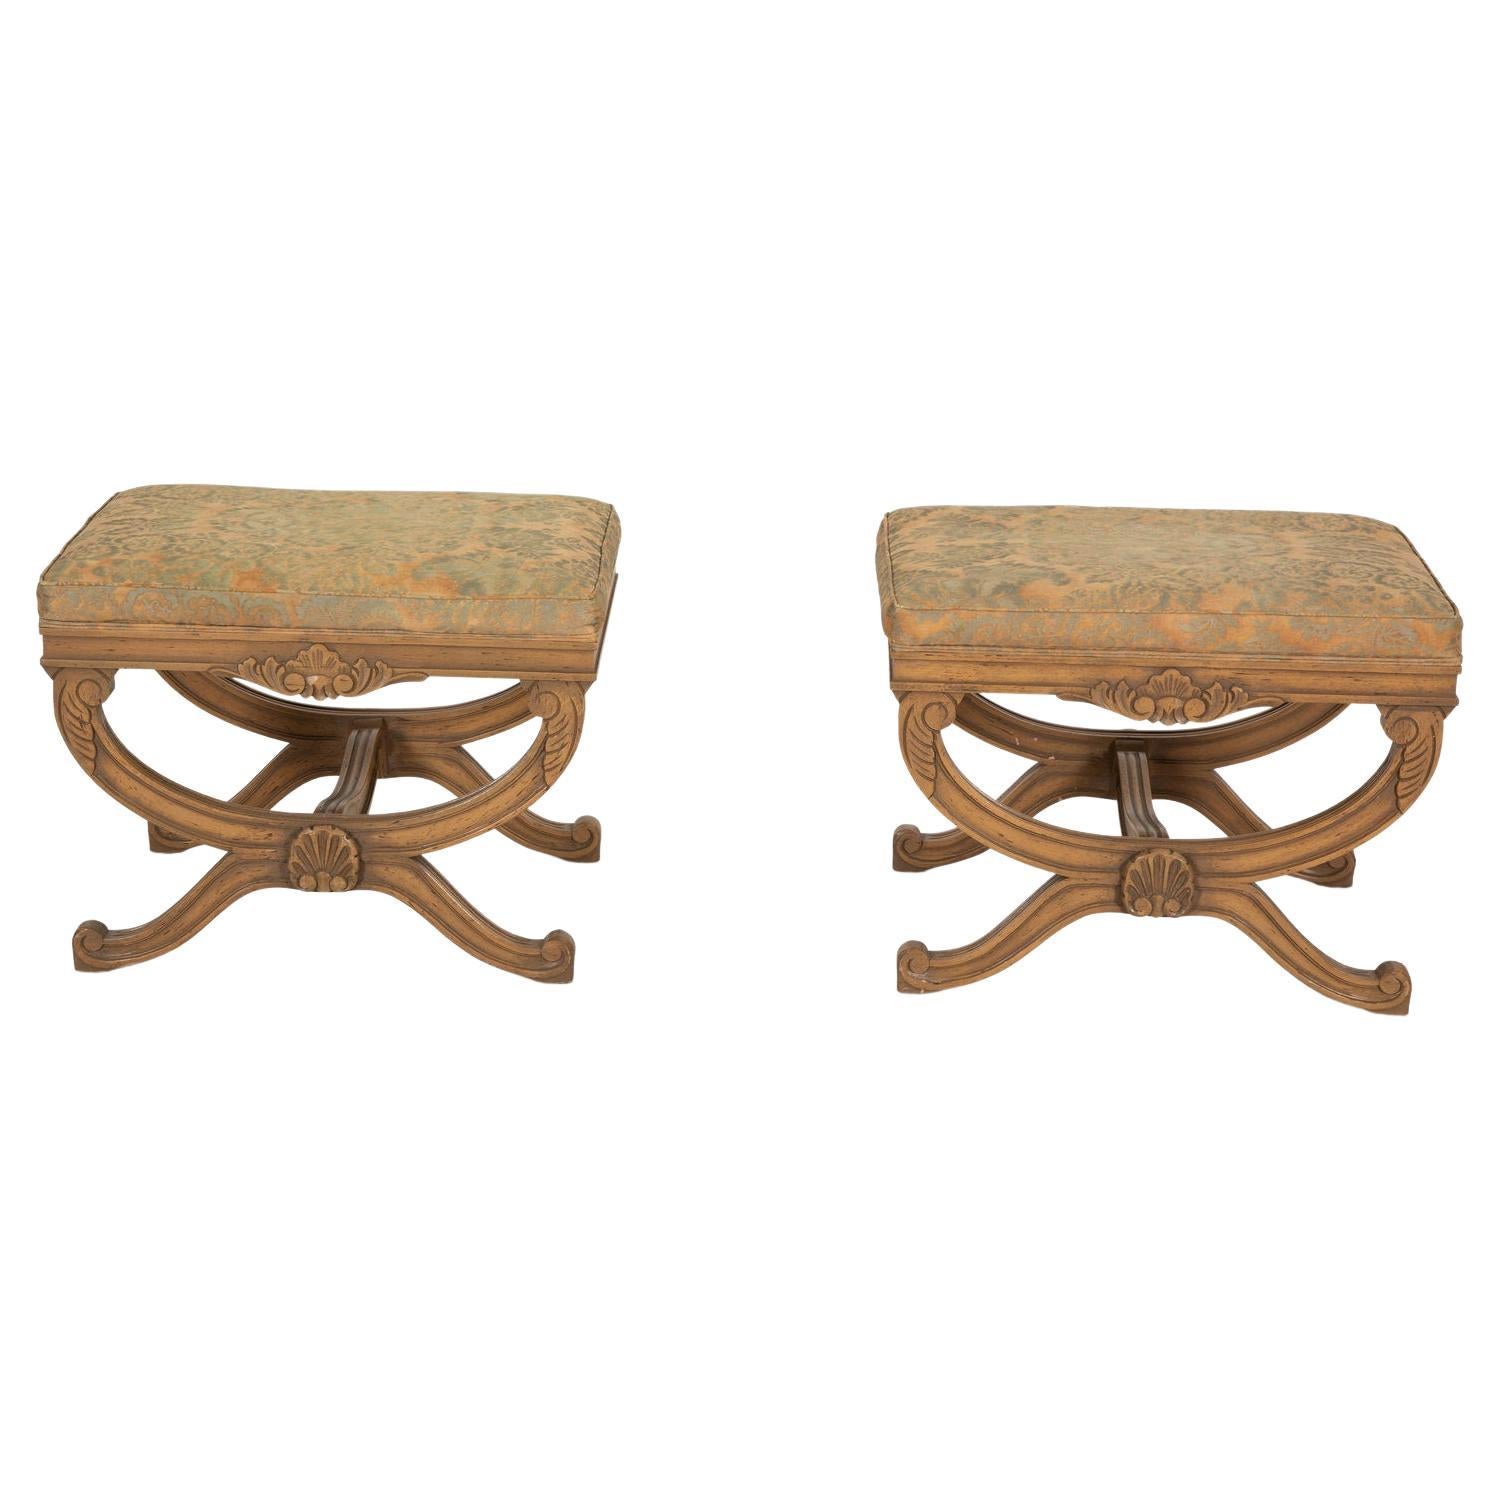 Pair Louis XVI style Curule stools
20th century
Measures: Height 18 x length 24 inches.
  